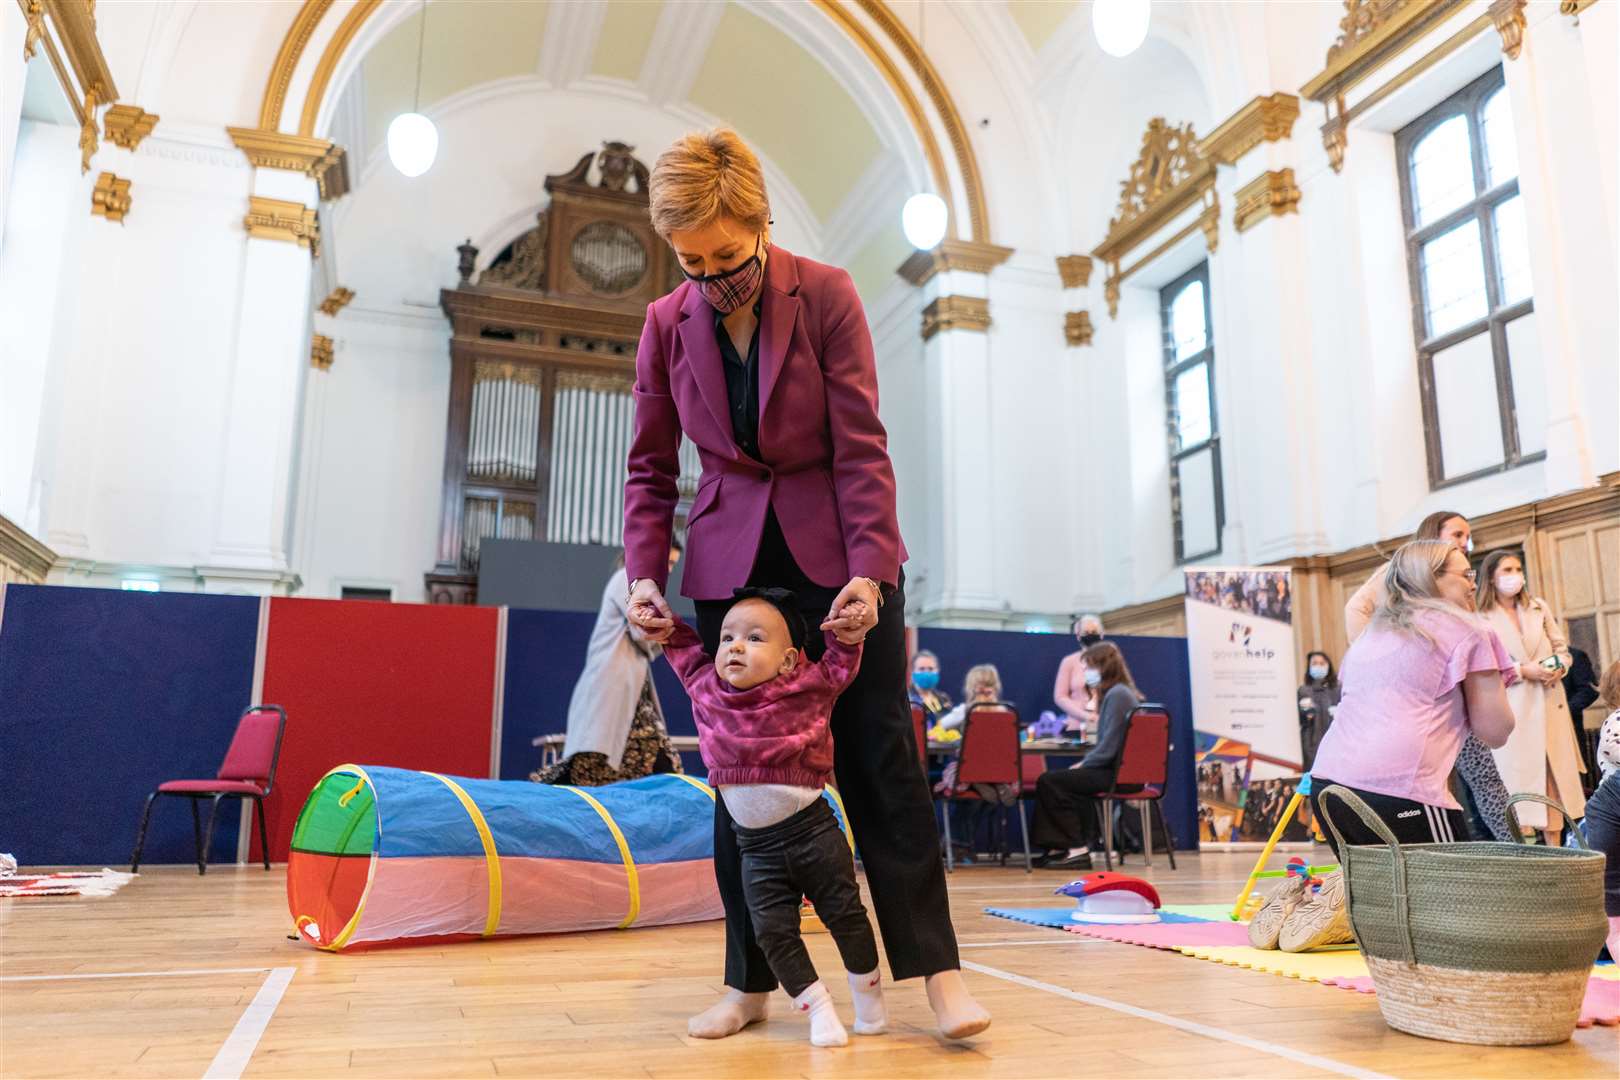 First Minister Nicola Sturgeon with nine month old Amelia Mackinnon as she meets families at Govan Help in Glasgow, a charity supporting vulnerable families, to mark the doubling of the Scottish Child Payment in April this year (Peter Summers/PA)